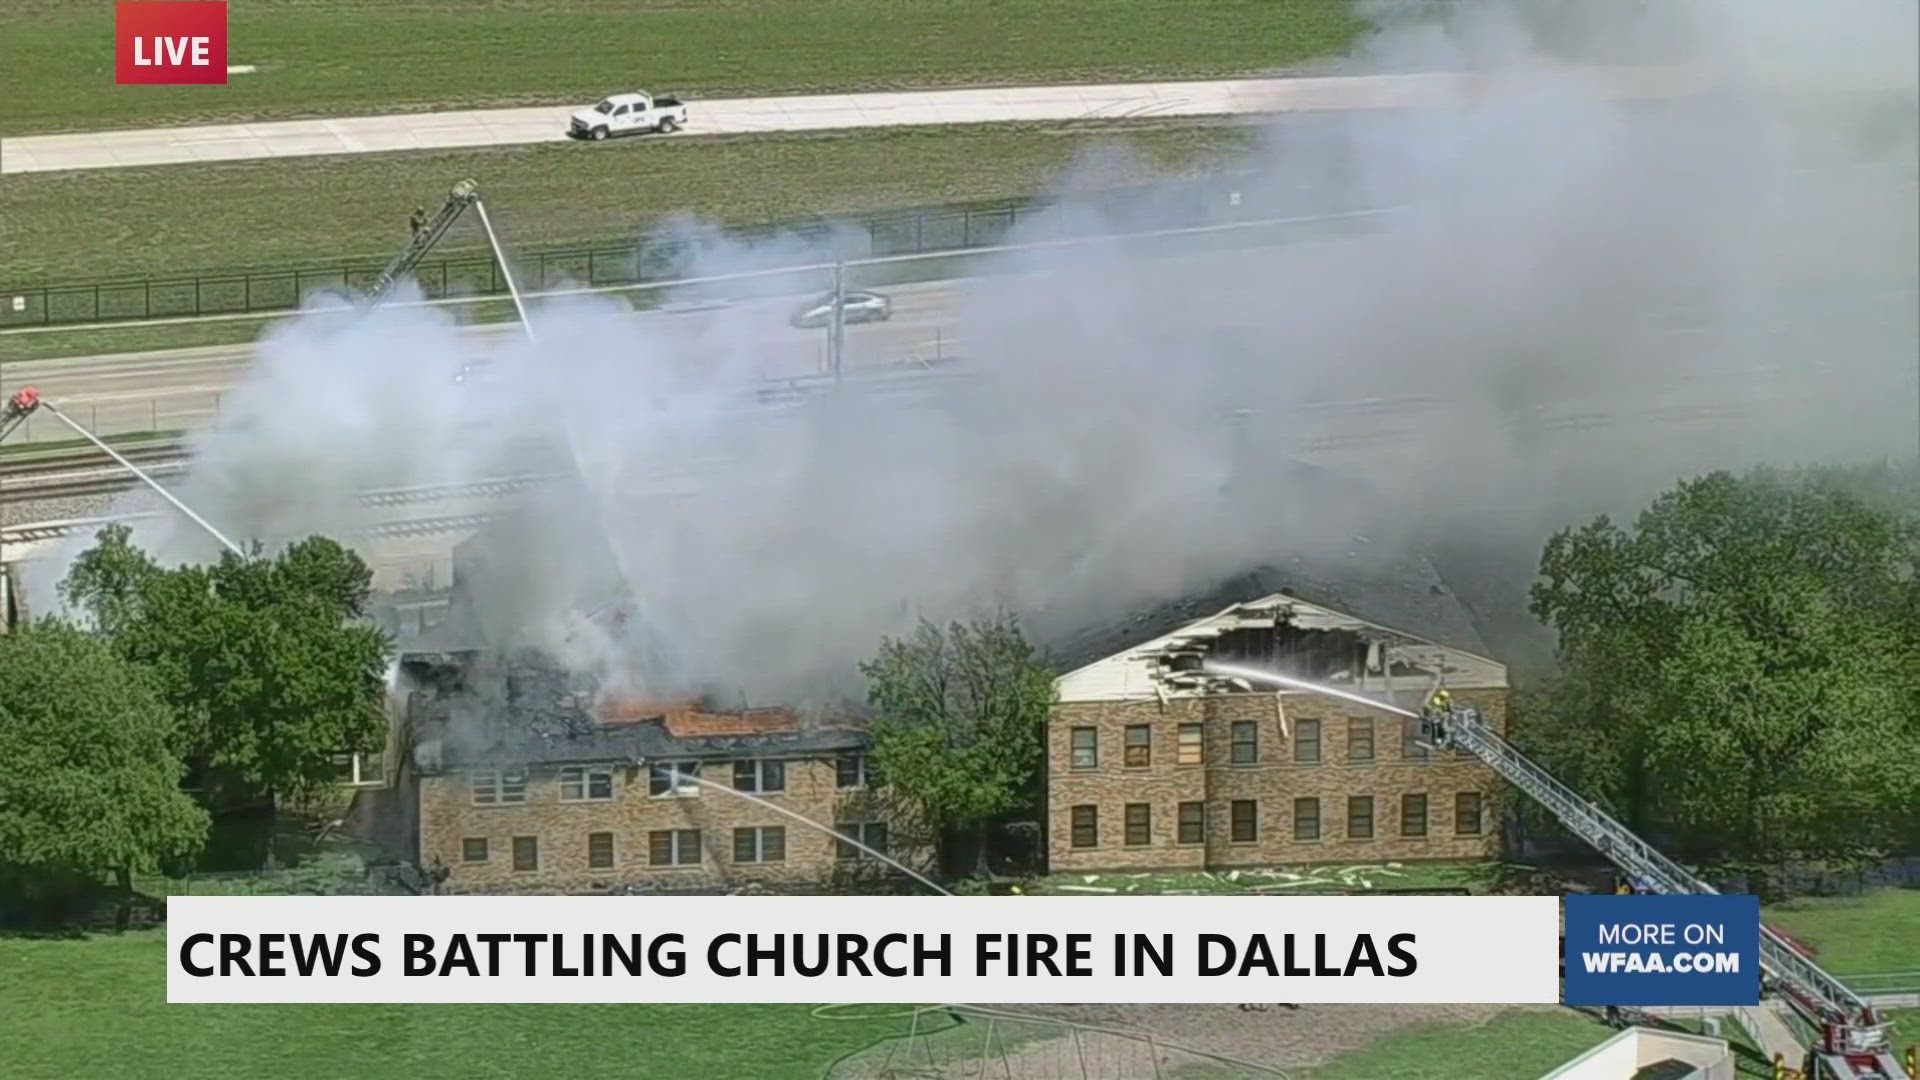 Dallas firefighters were battling a massive fire at a church near Love Field Airport on Tuesday afternoon. This is near Denton Drive and Bombay Avenue.